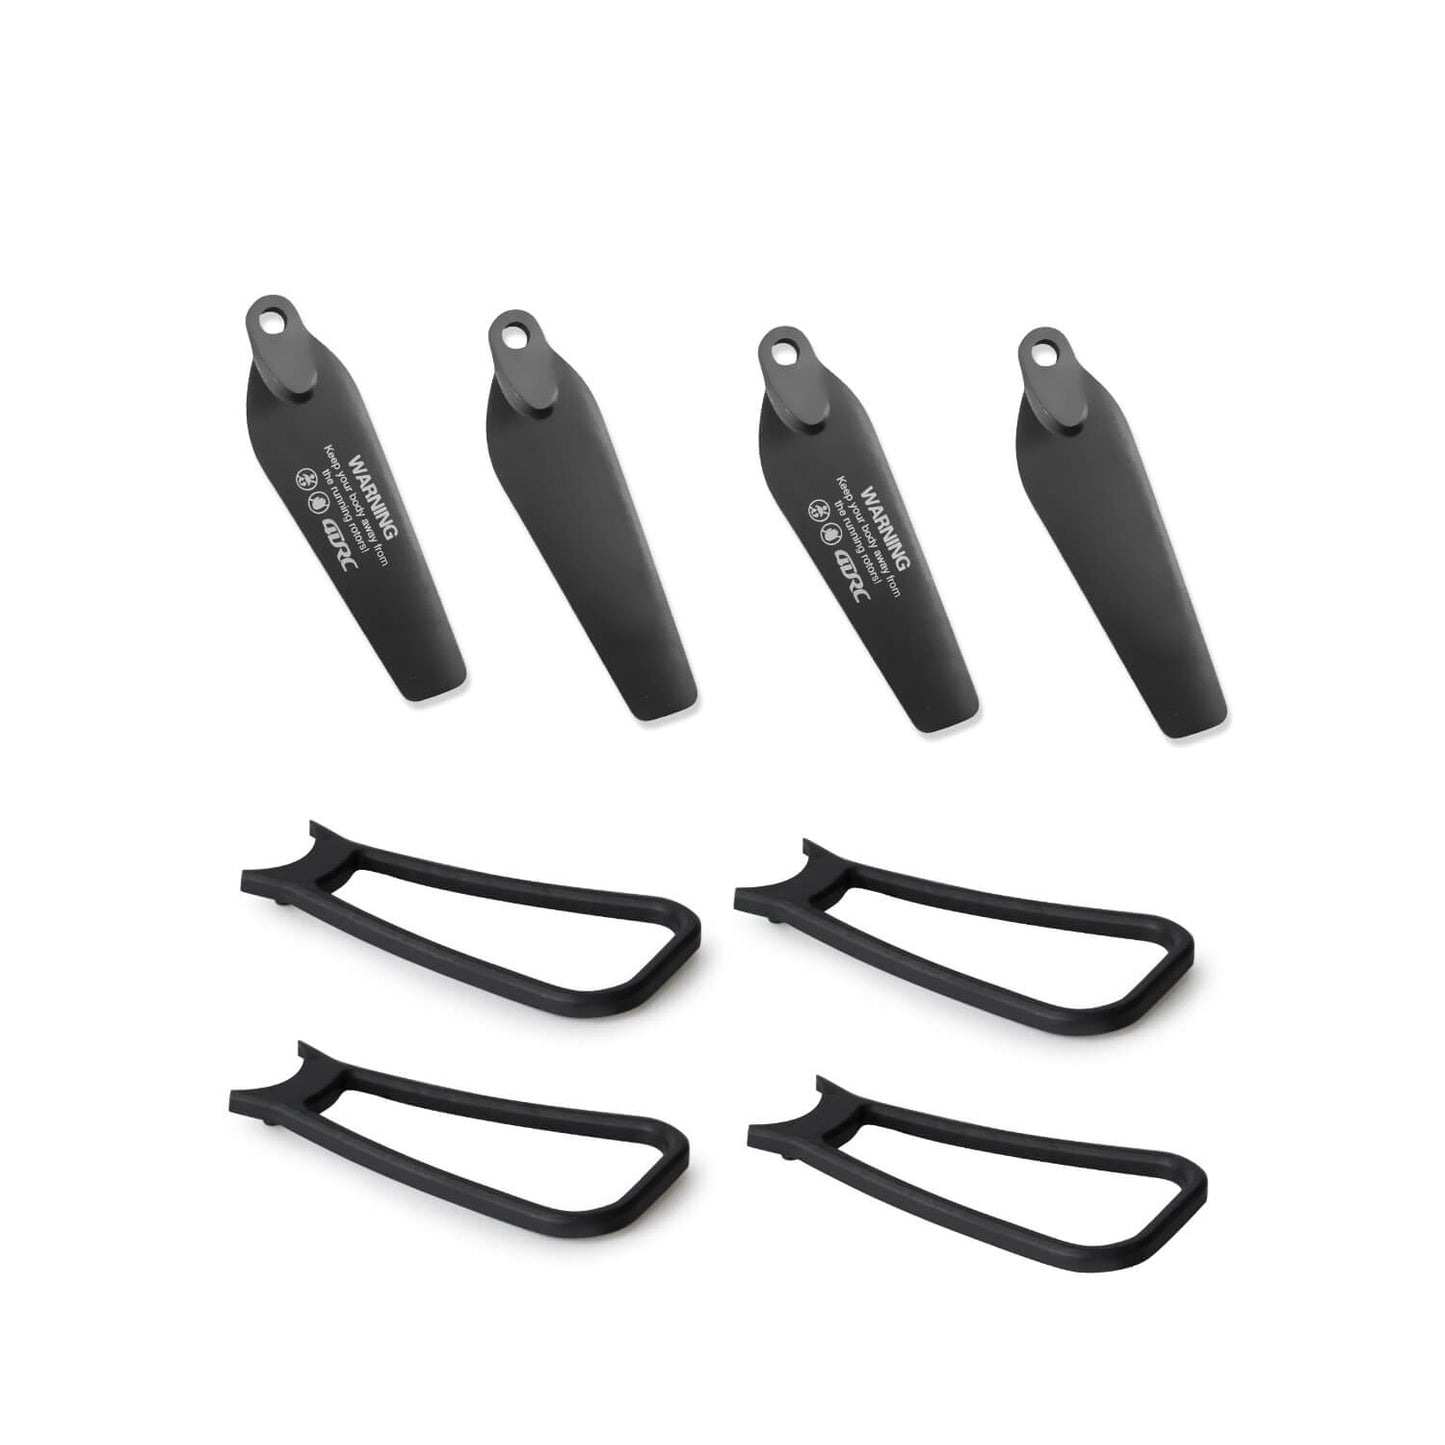 4D-V13 Drone Accessories Optional (spare battery + charging cable / spare propeller + protective cover)